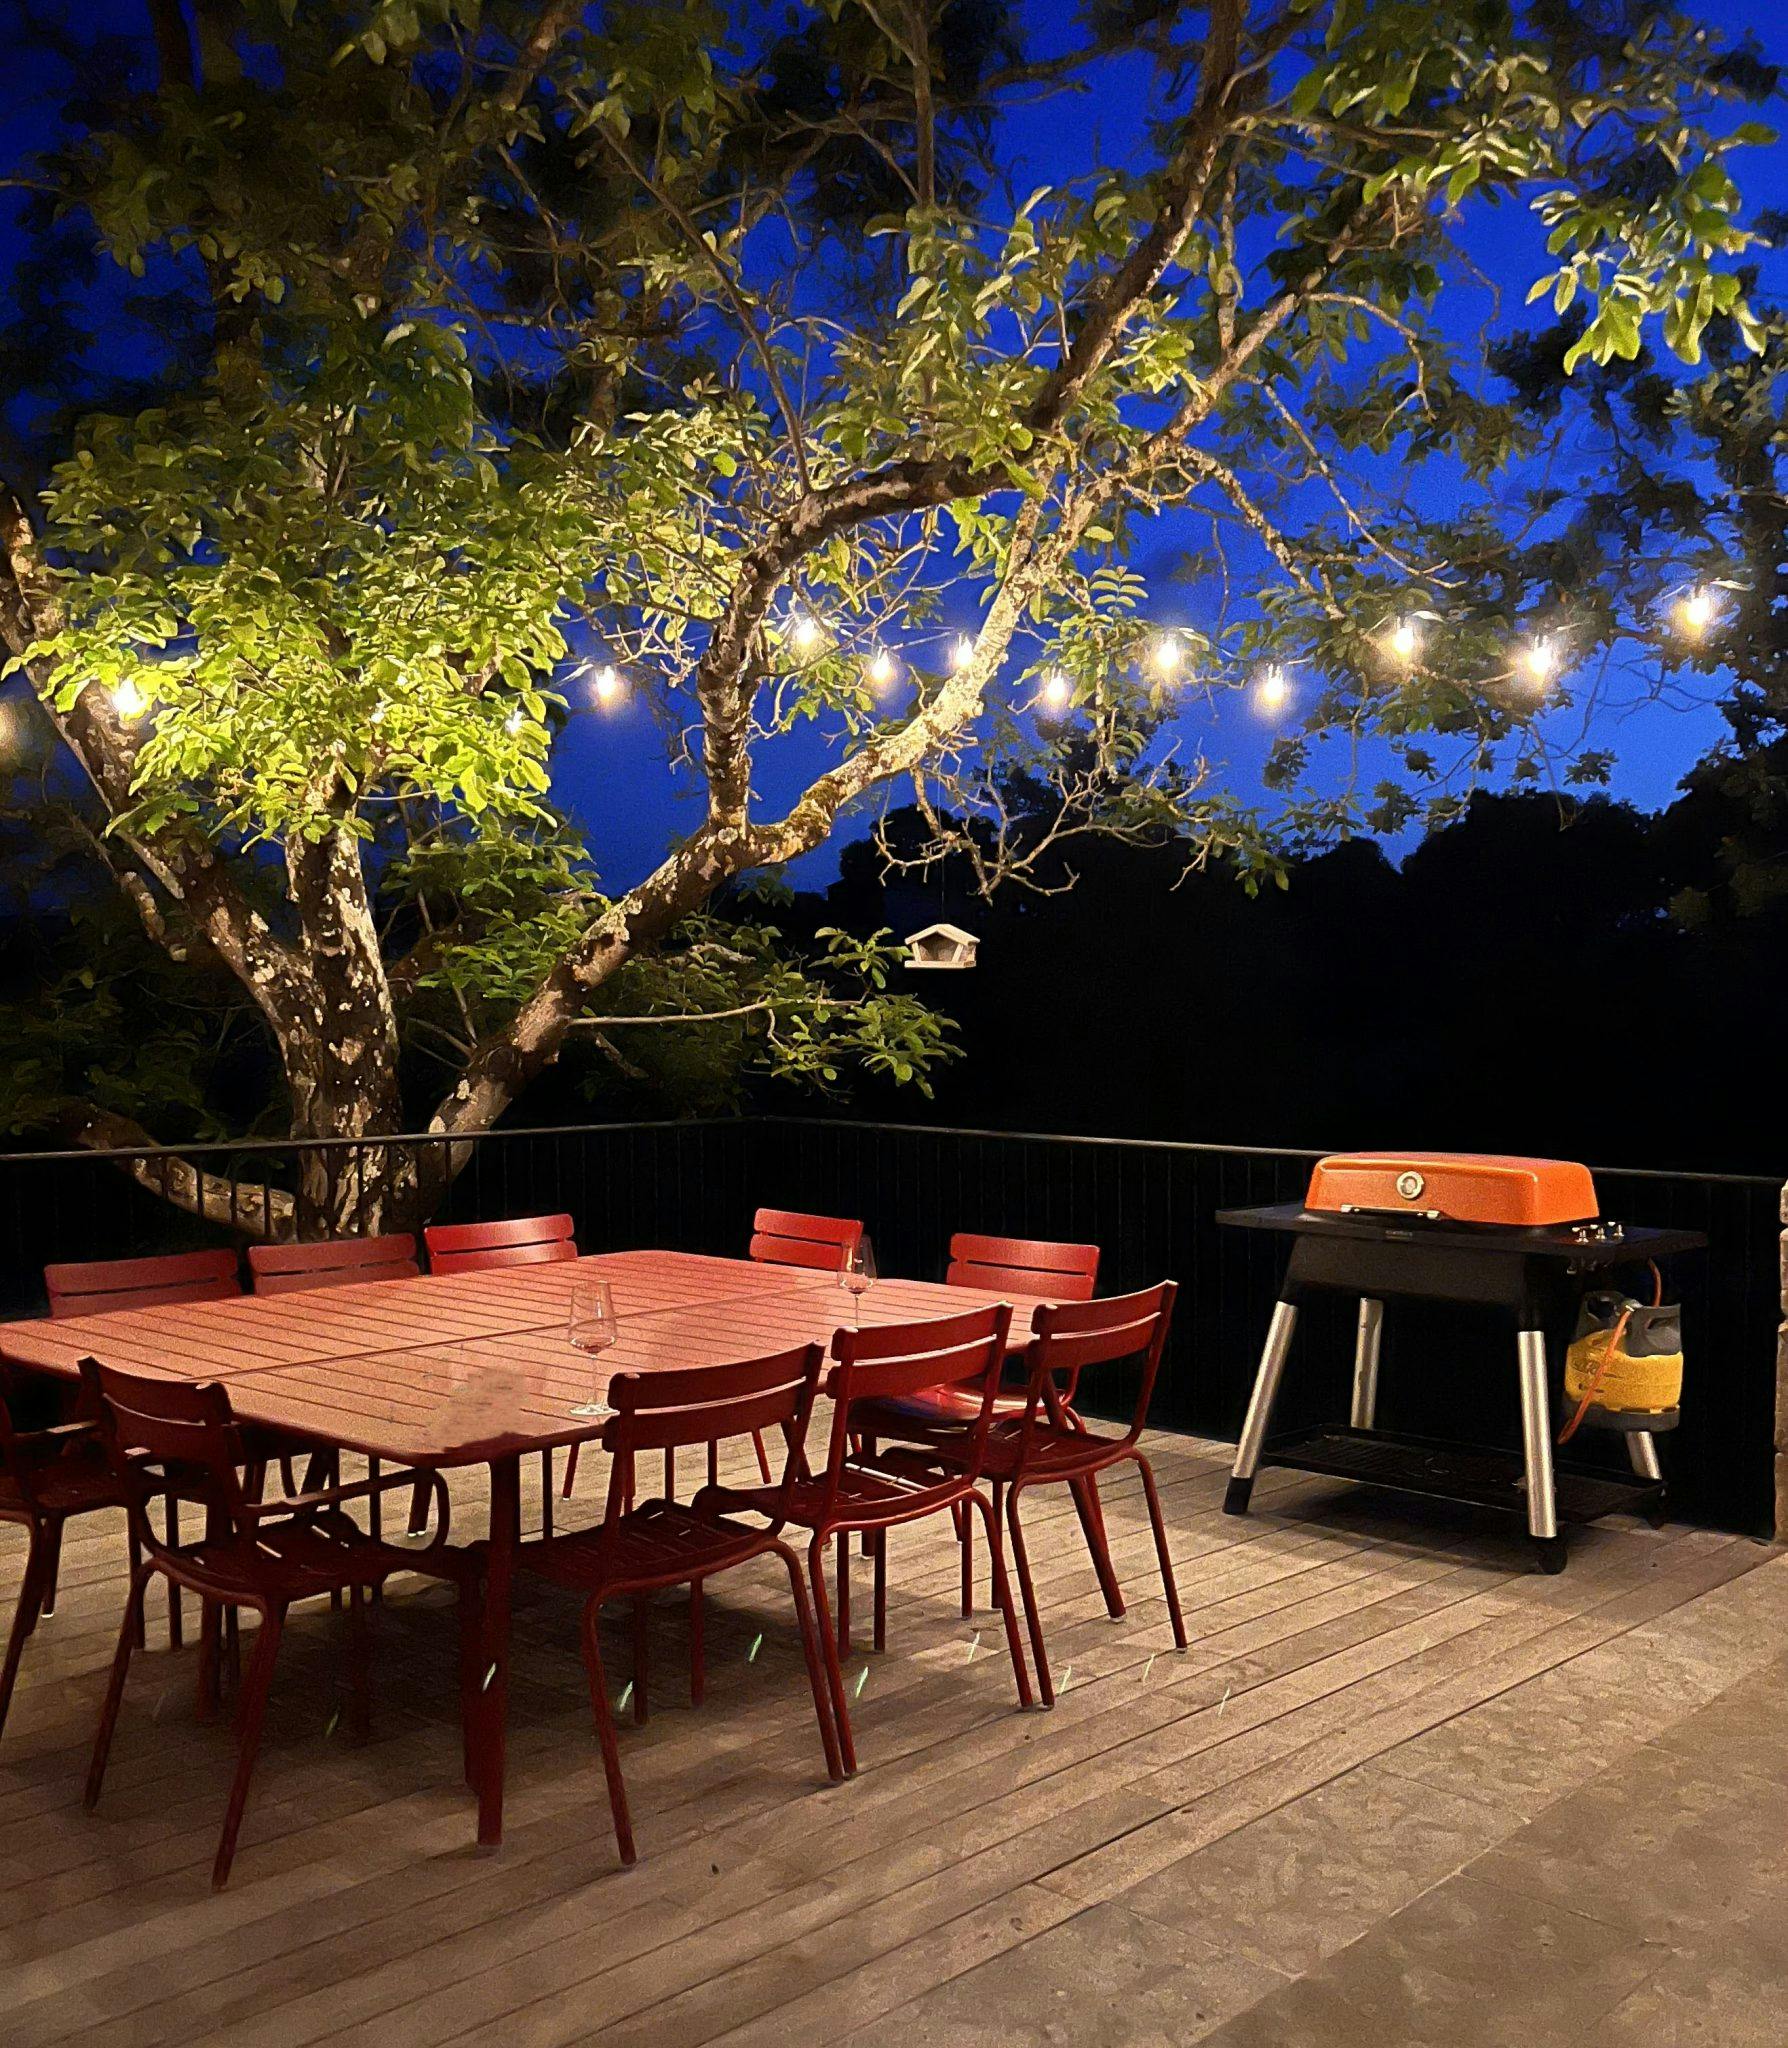 Terrace at night, red table illuminated by garland